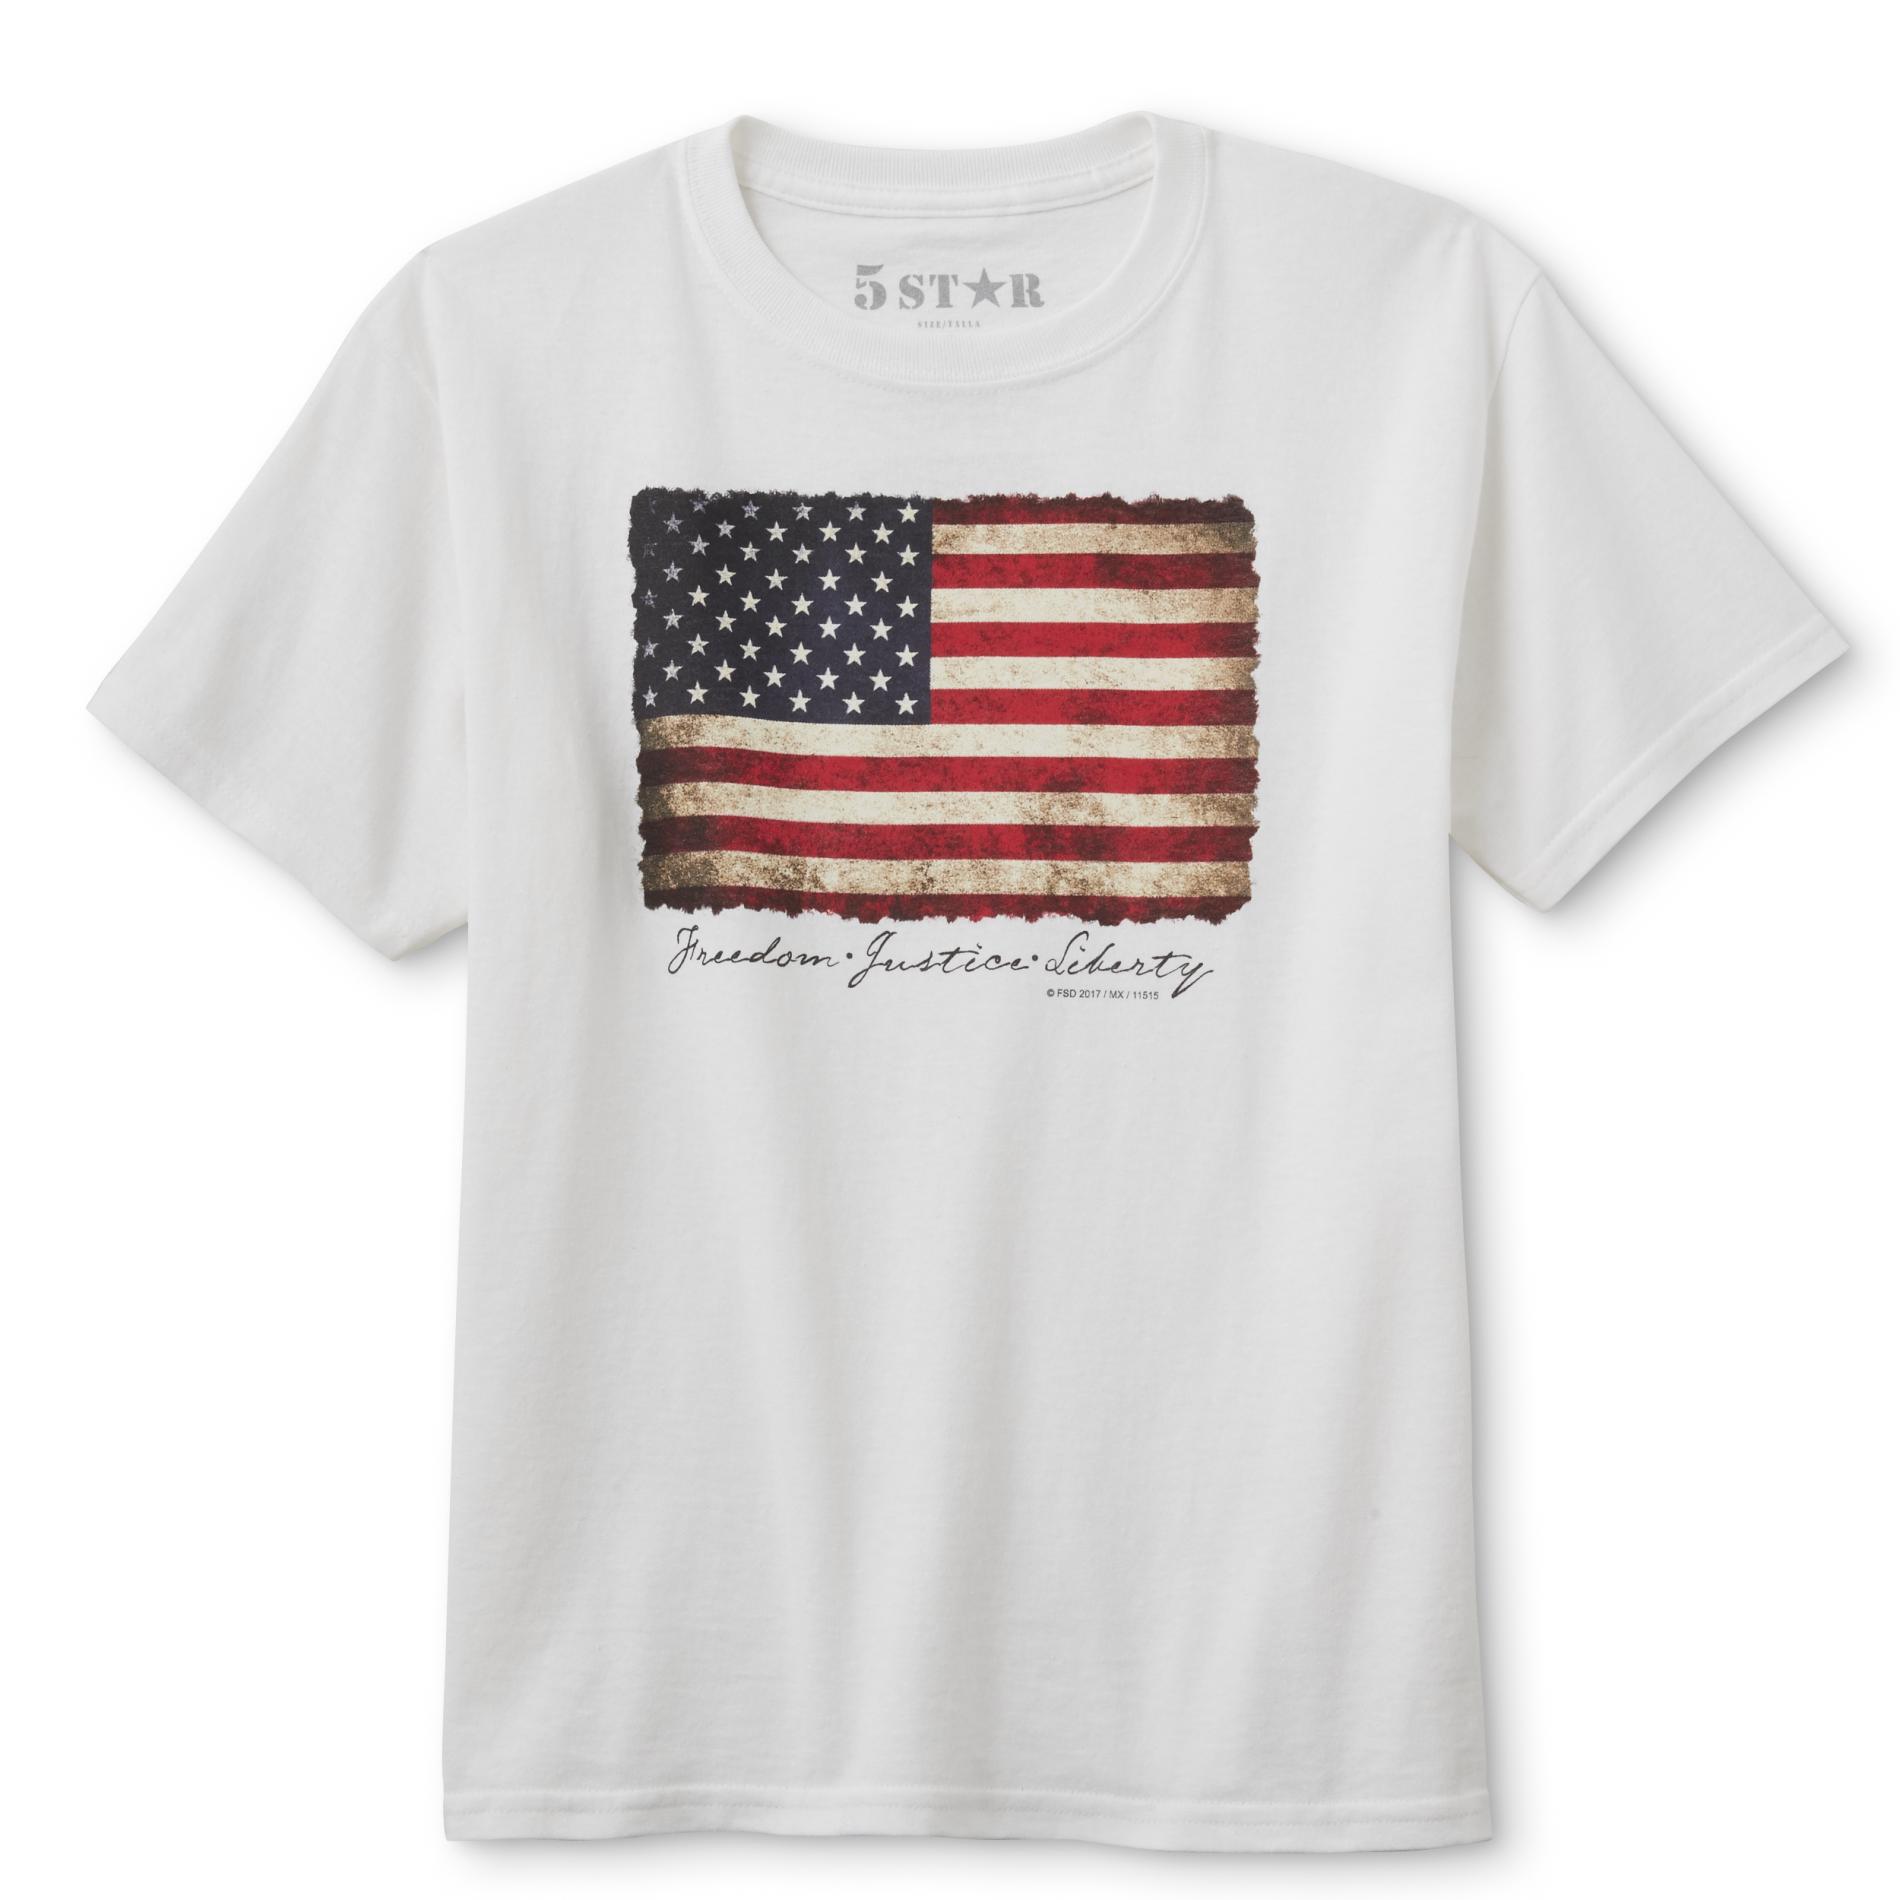 Boys' Graphic T-Shirt - Freedom Justice Liberty